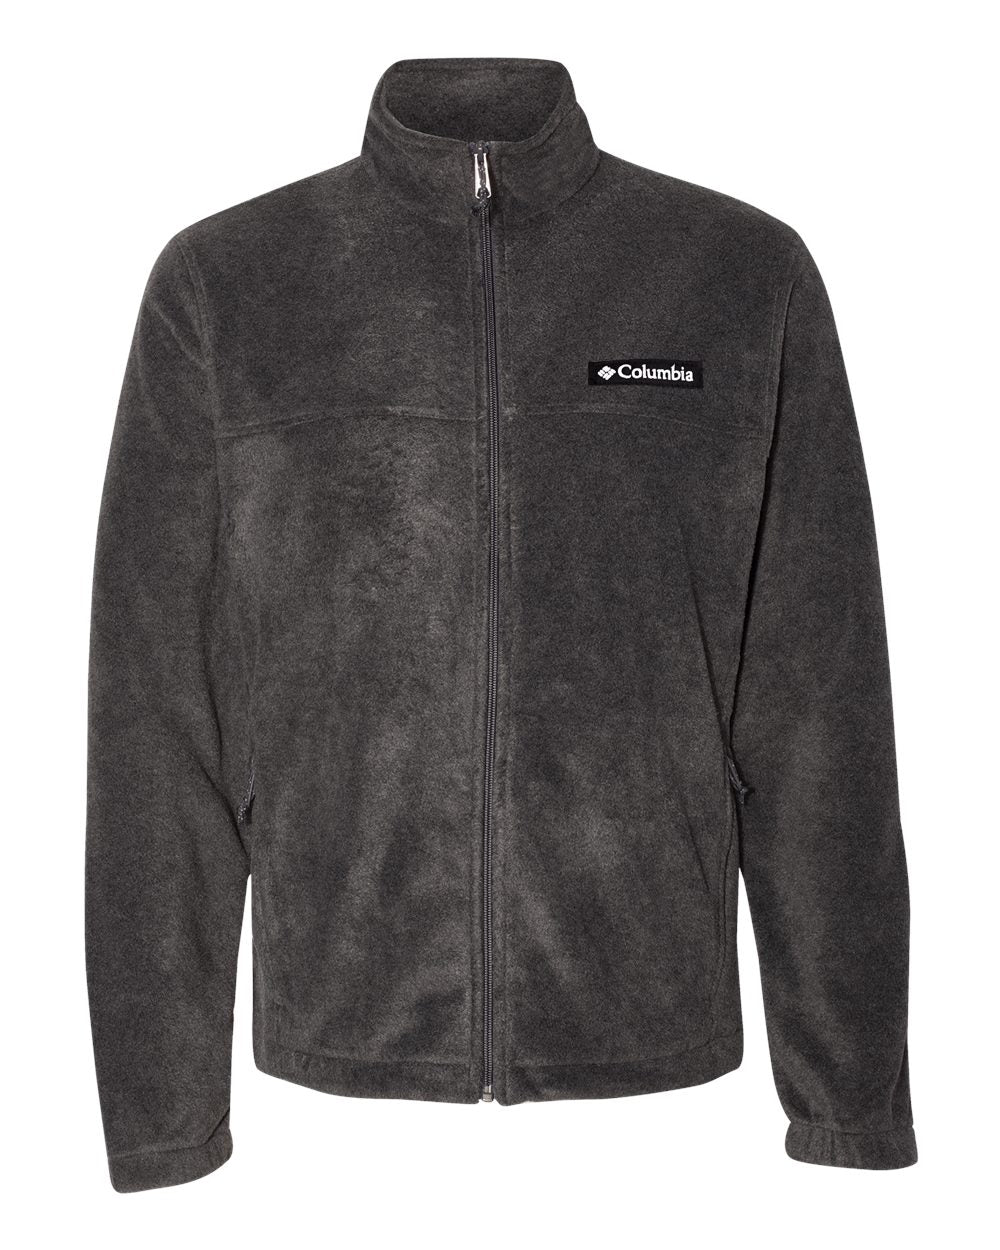 Columbia_147667_Charcoal_Heather_Front_High.jpg